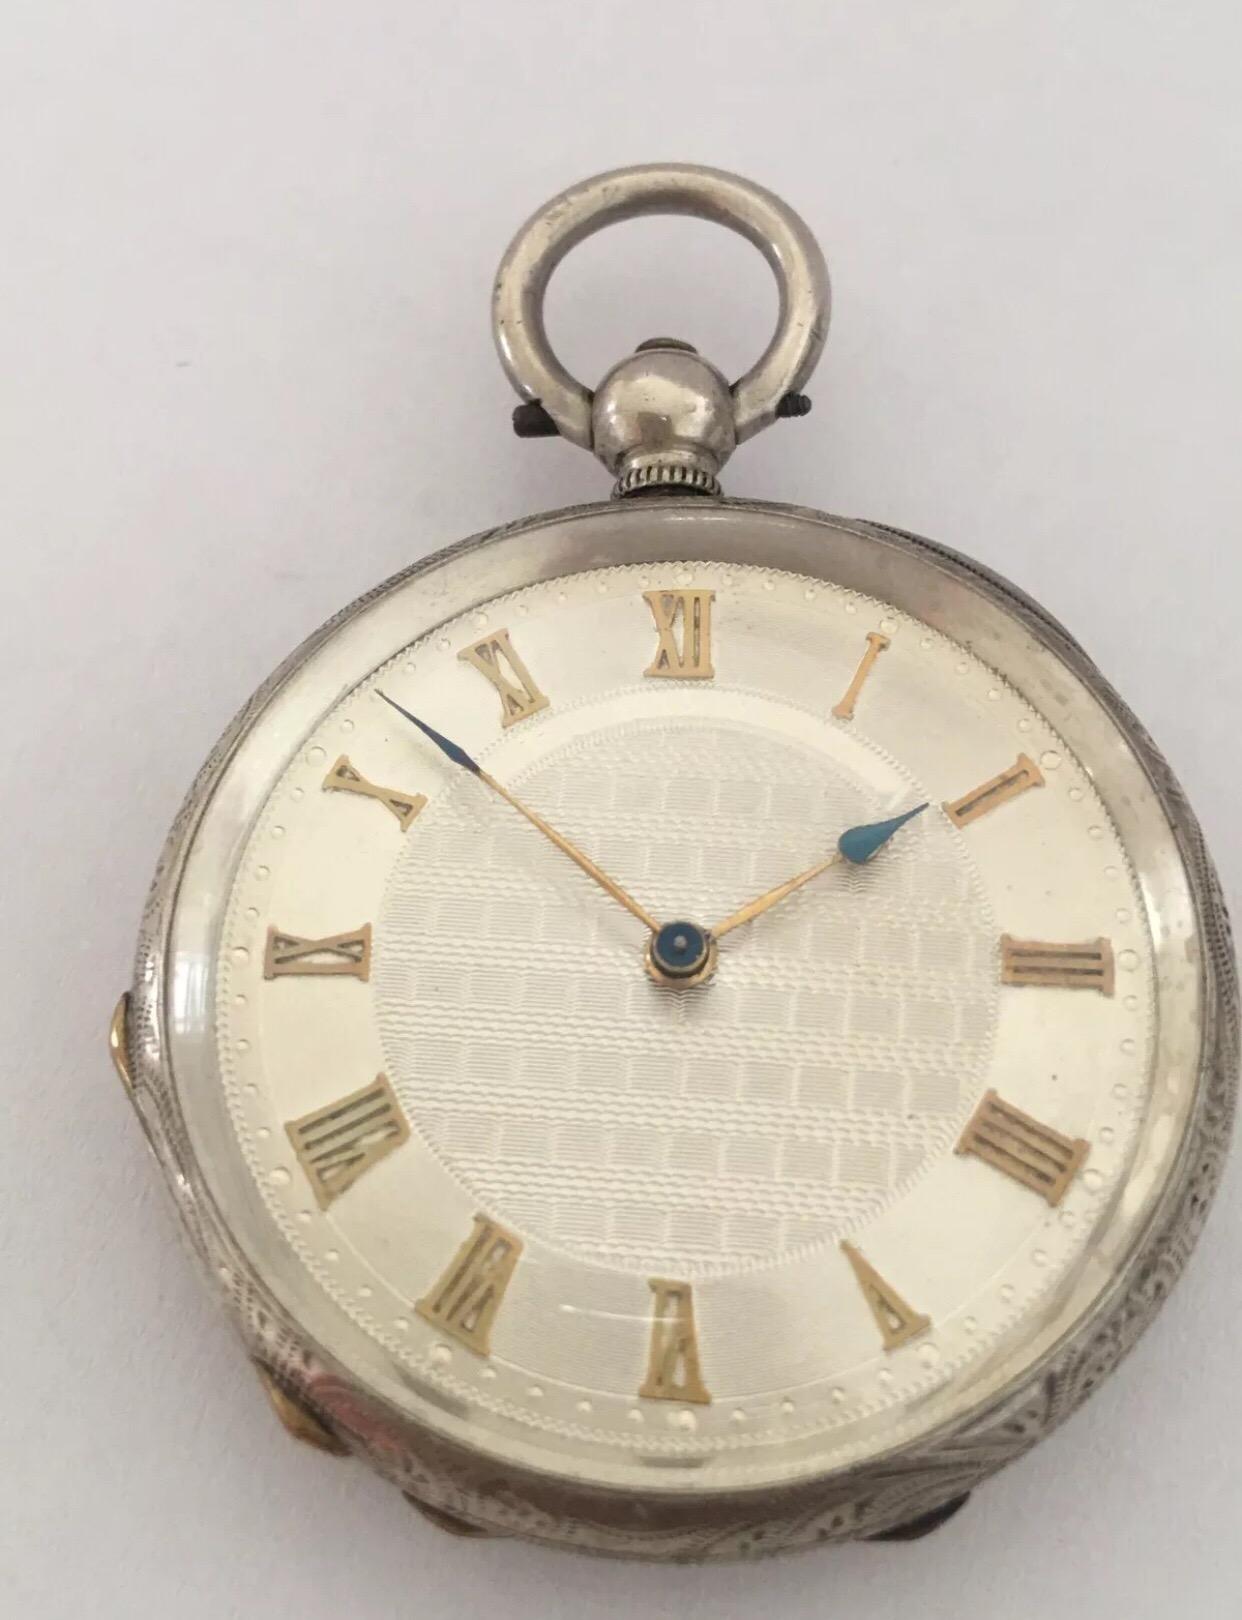 Small Antique Silver Key-Wind Pocket Watch Signed A. Bremer, Geneve, circa 1880s For Sale 2